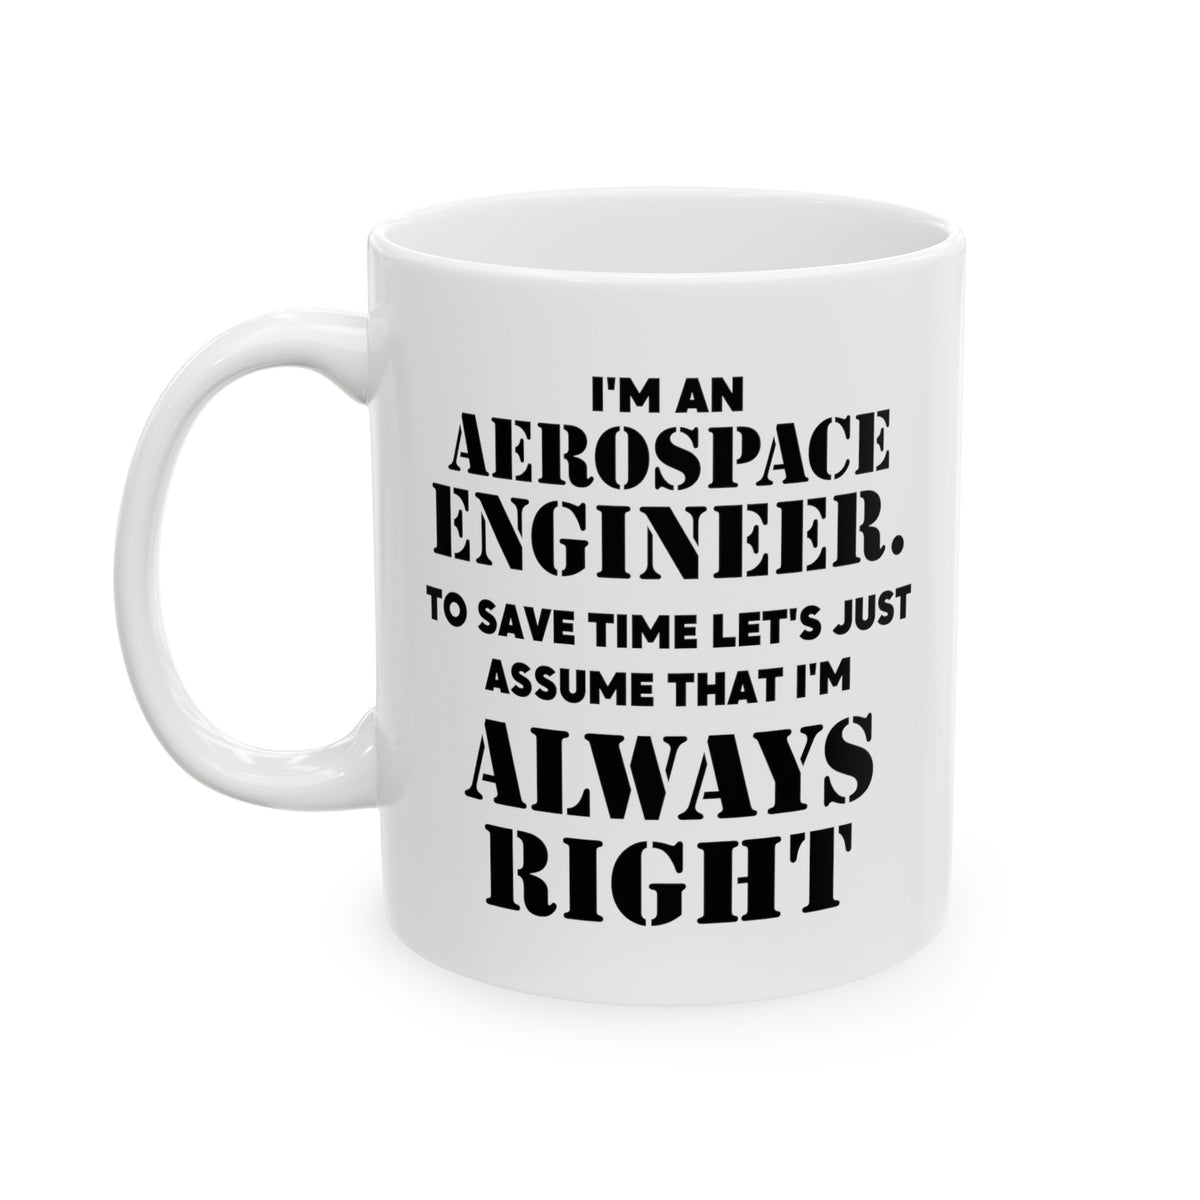 I'm An Aerospace Engineer. To Save Time Let’s Just Assume That I’m Always Right Mug - Funny Aerospace Engineer Ceramic Coffee Cup